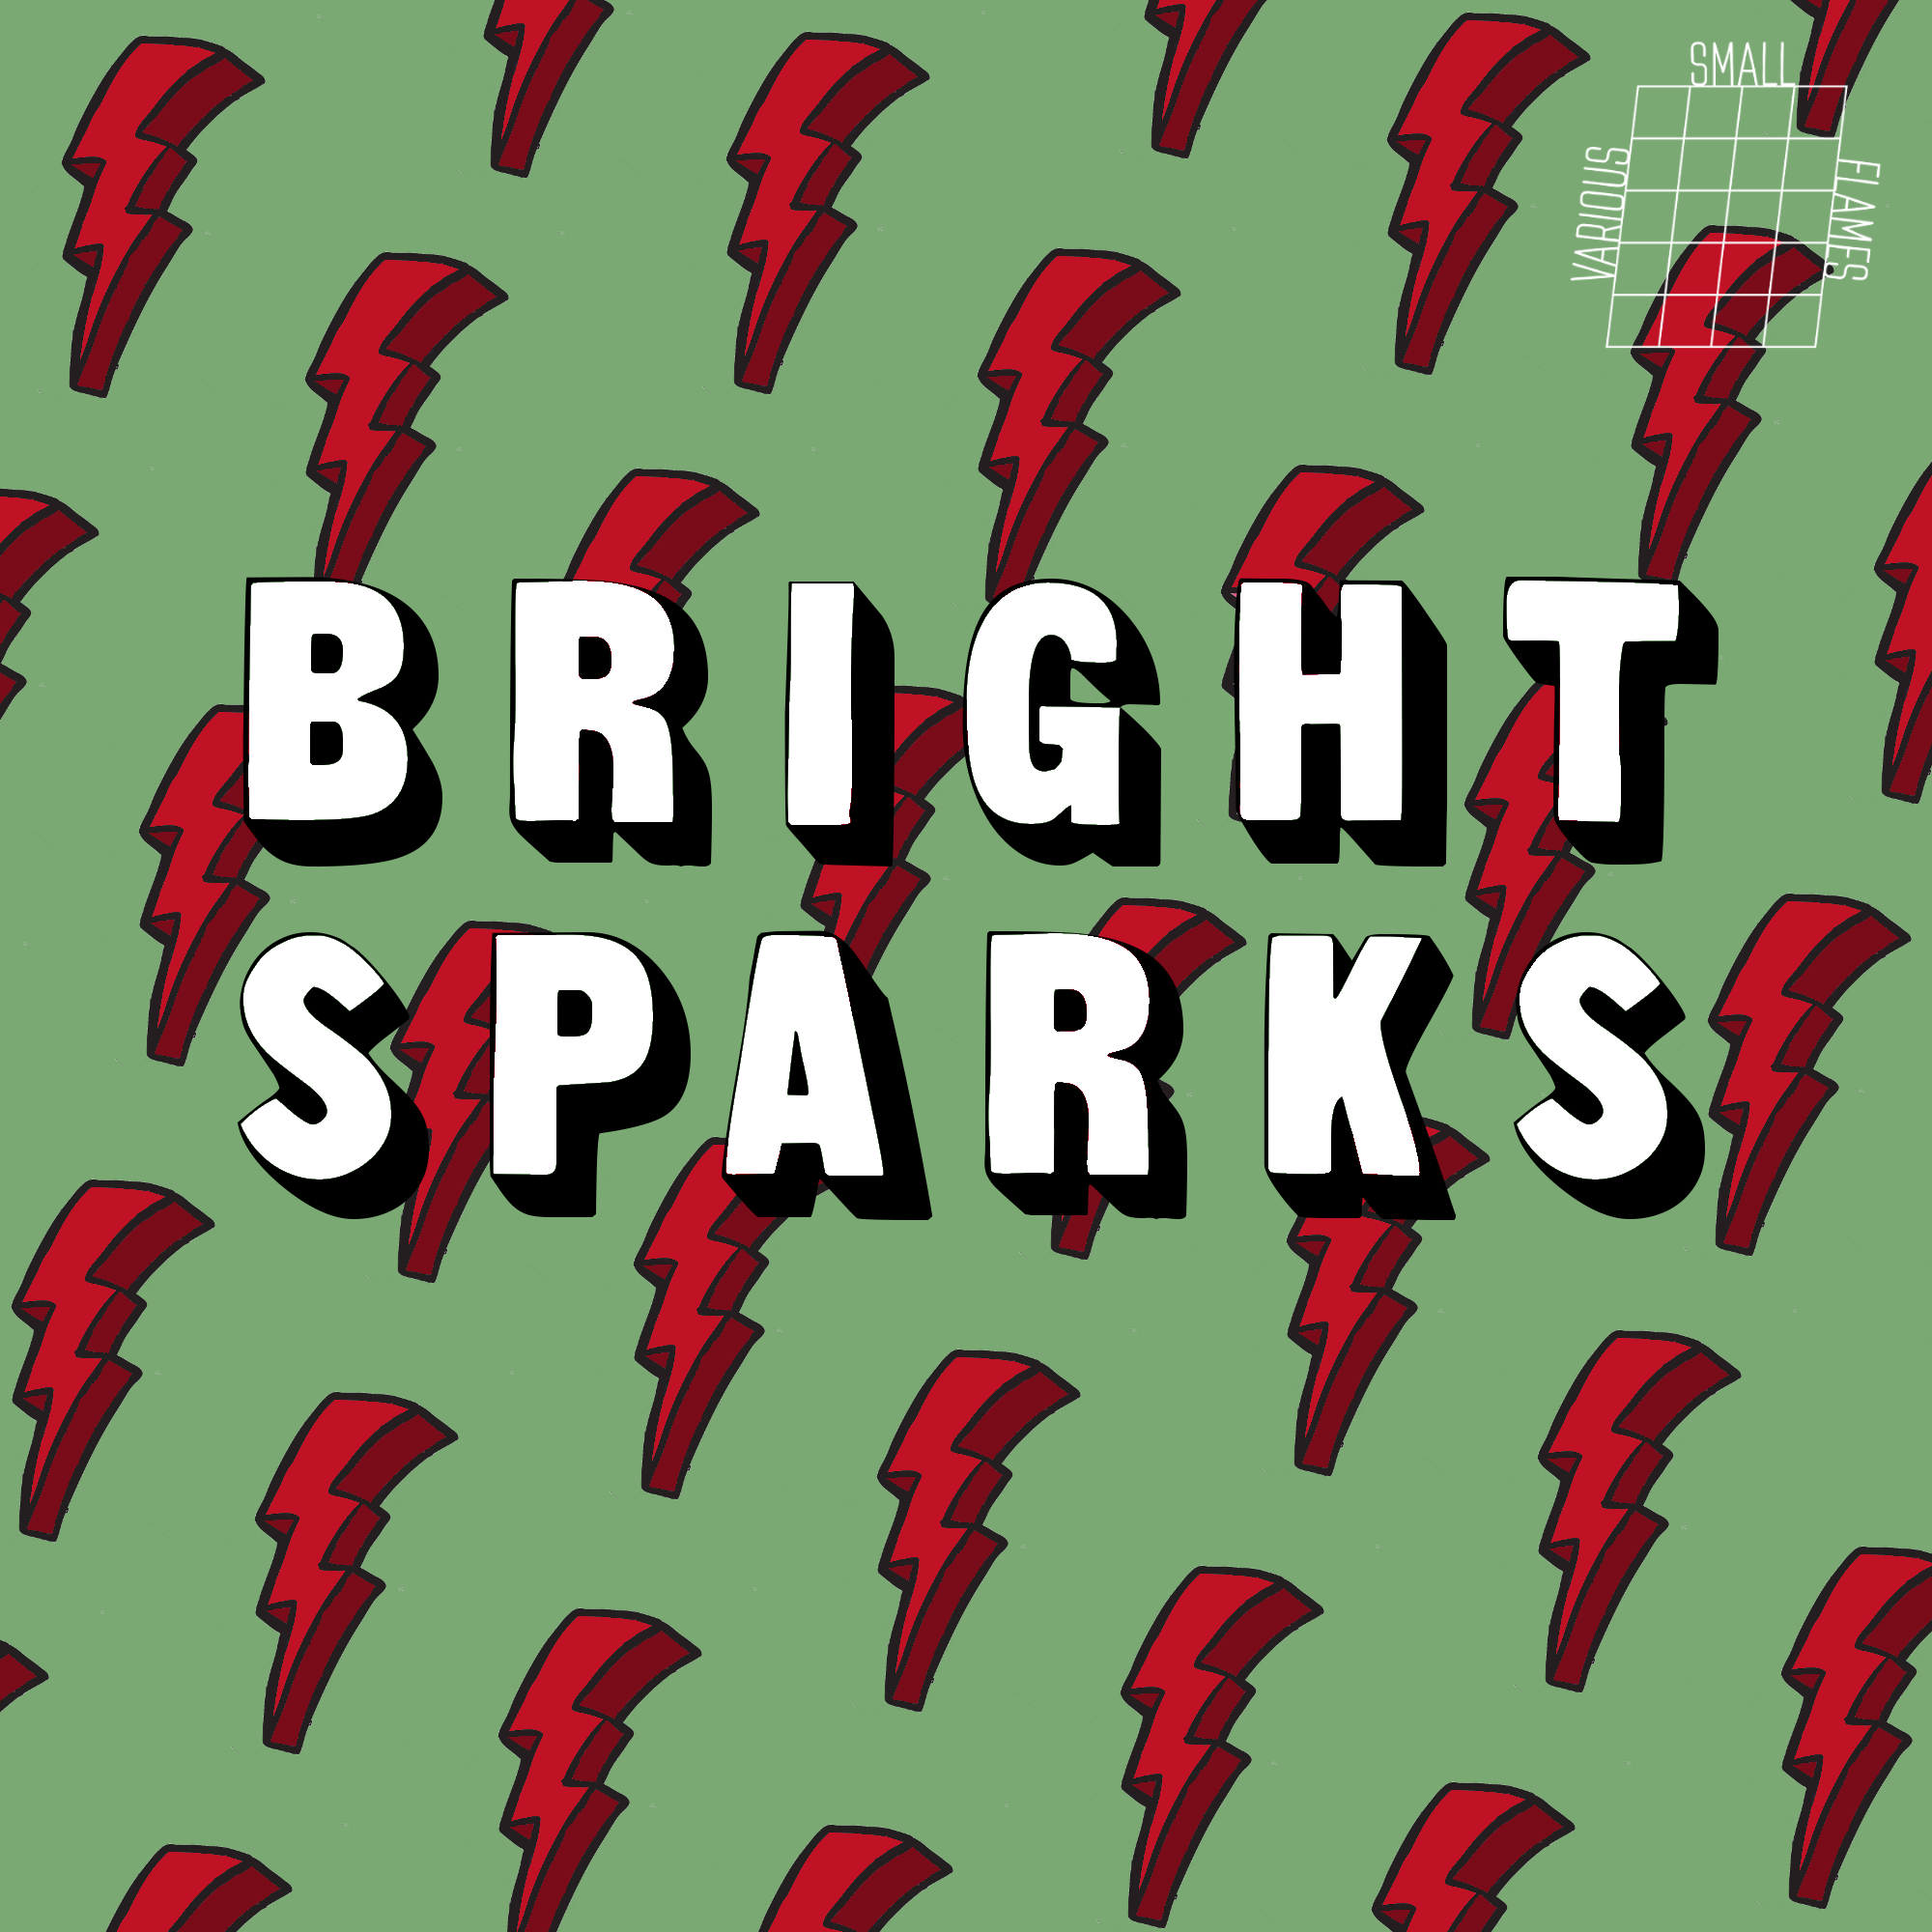 cartoon lightning bolts behind text that says Bright Sparks